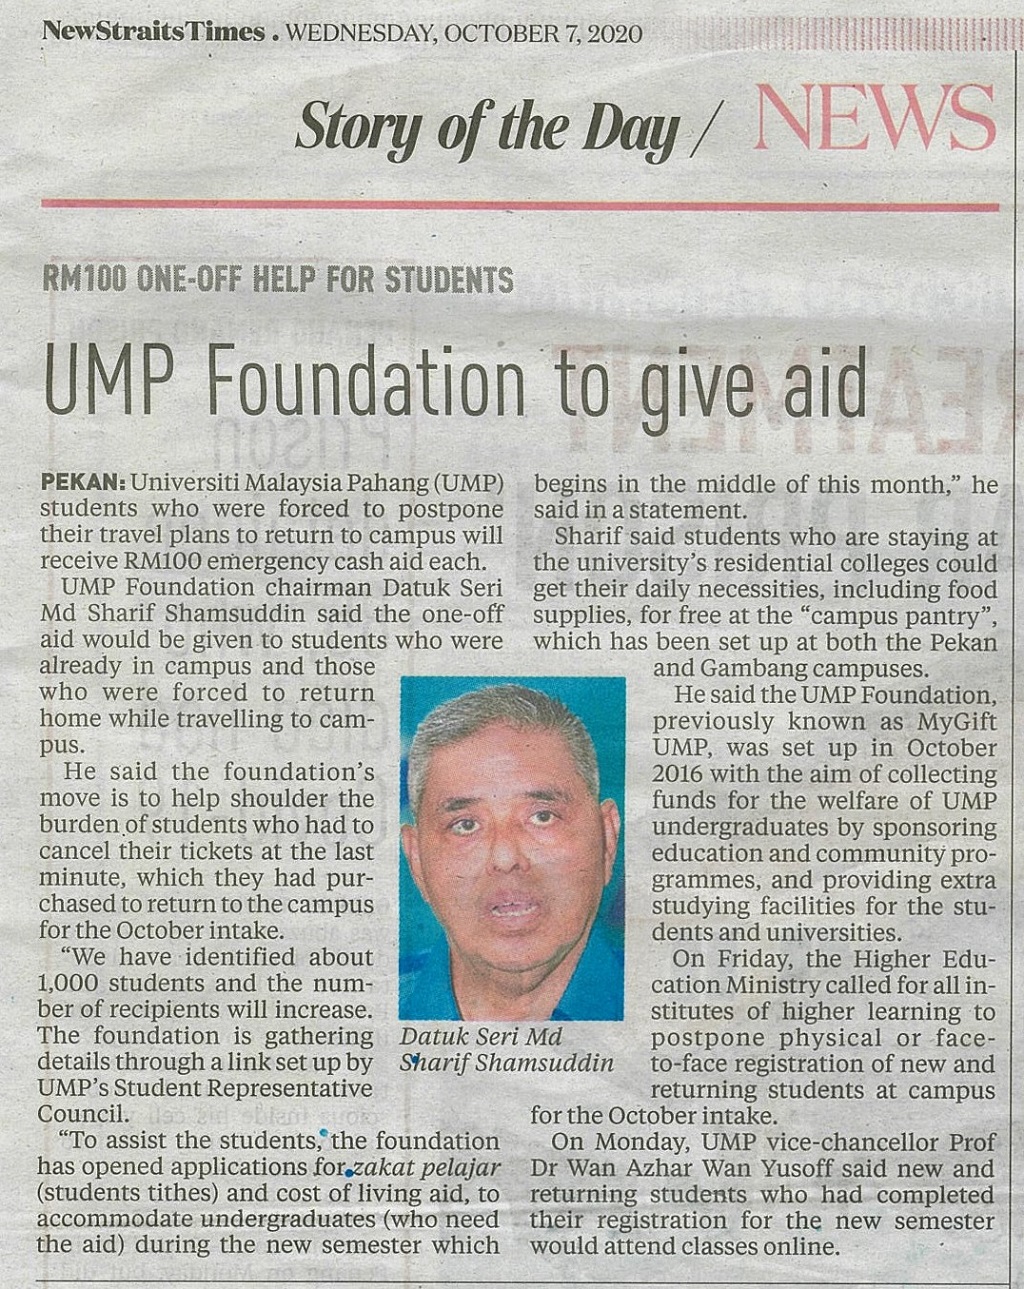 UMP Foundation to give aid